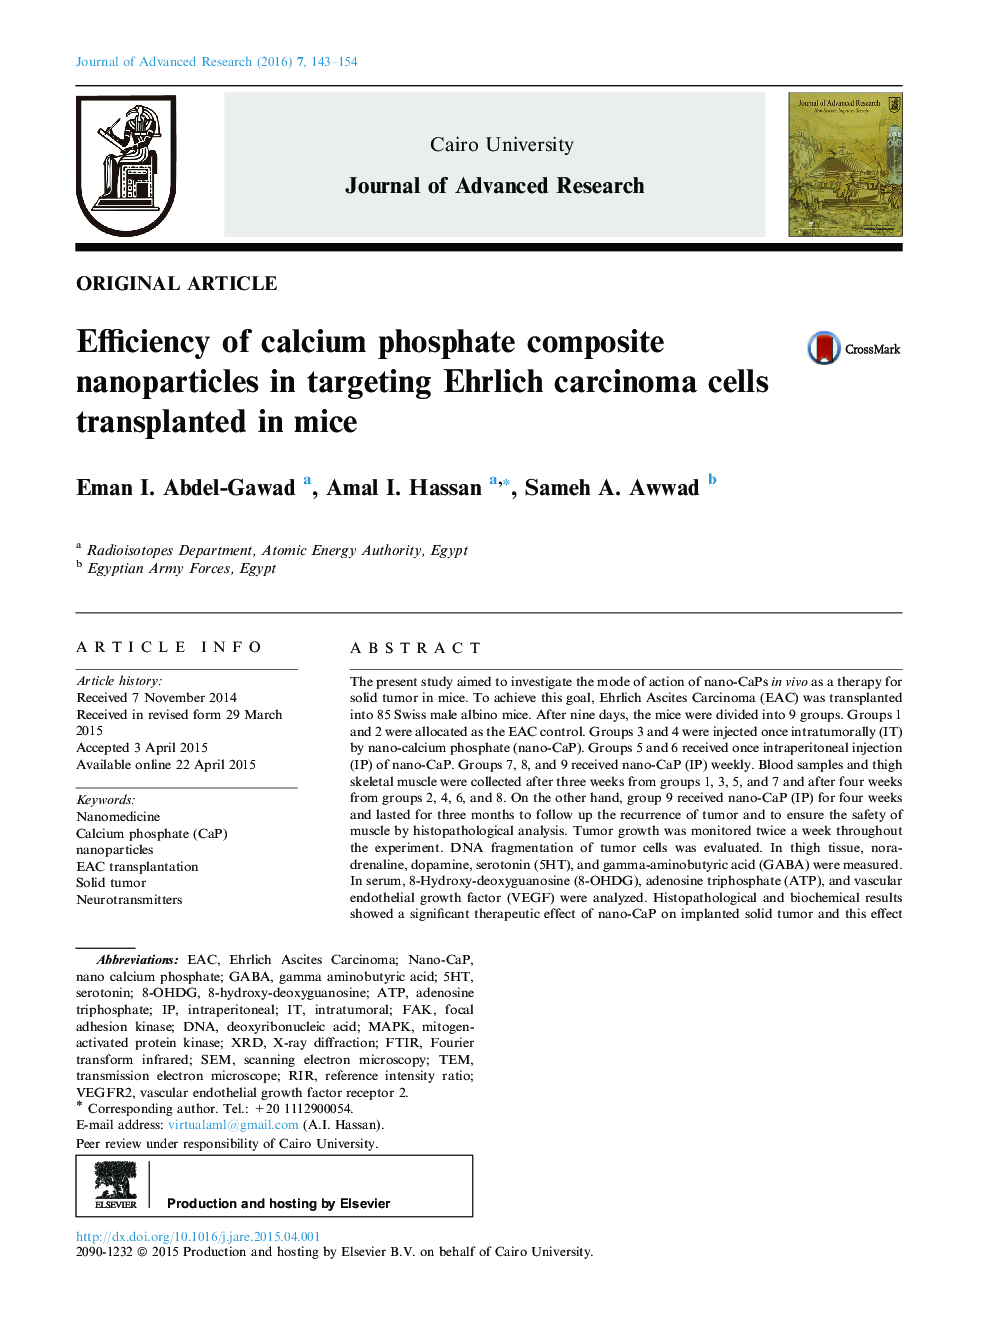 Efficiency of calcium phosphate composite nanoparticles in targeting Ehrlich carcinoma cells transplanted in mice 